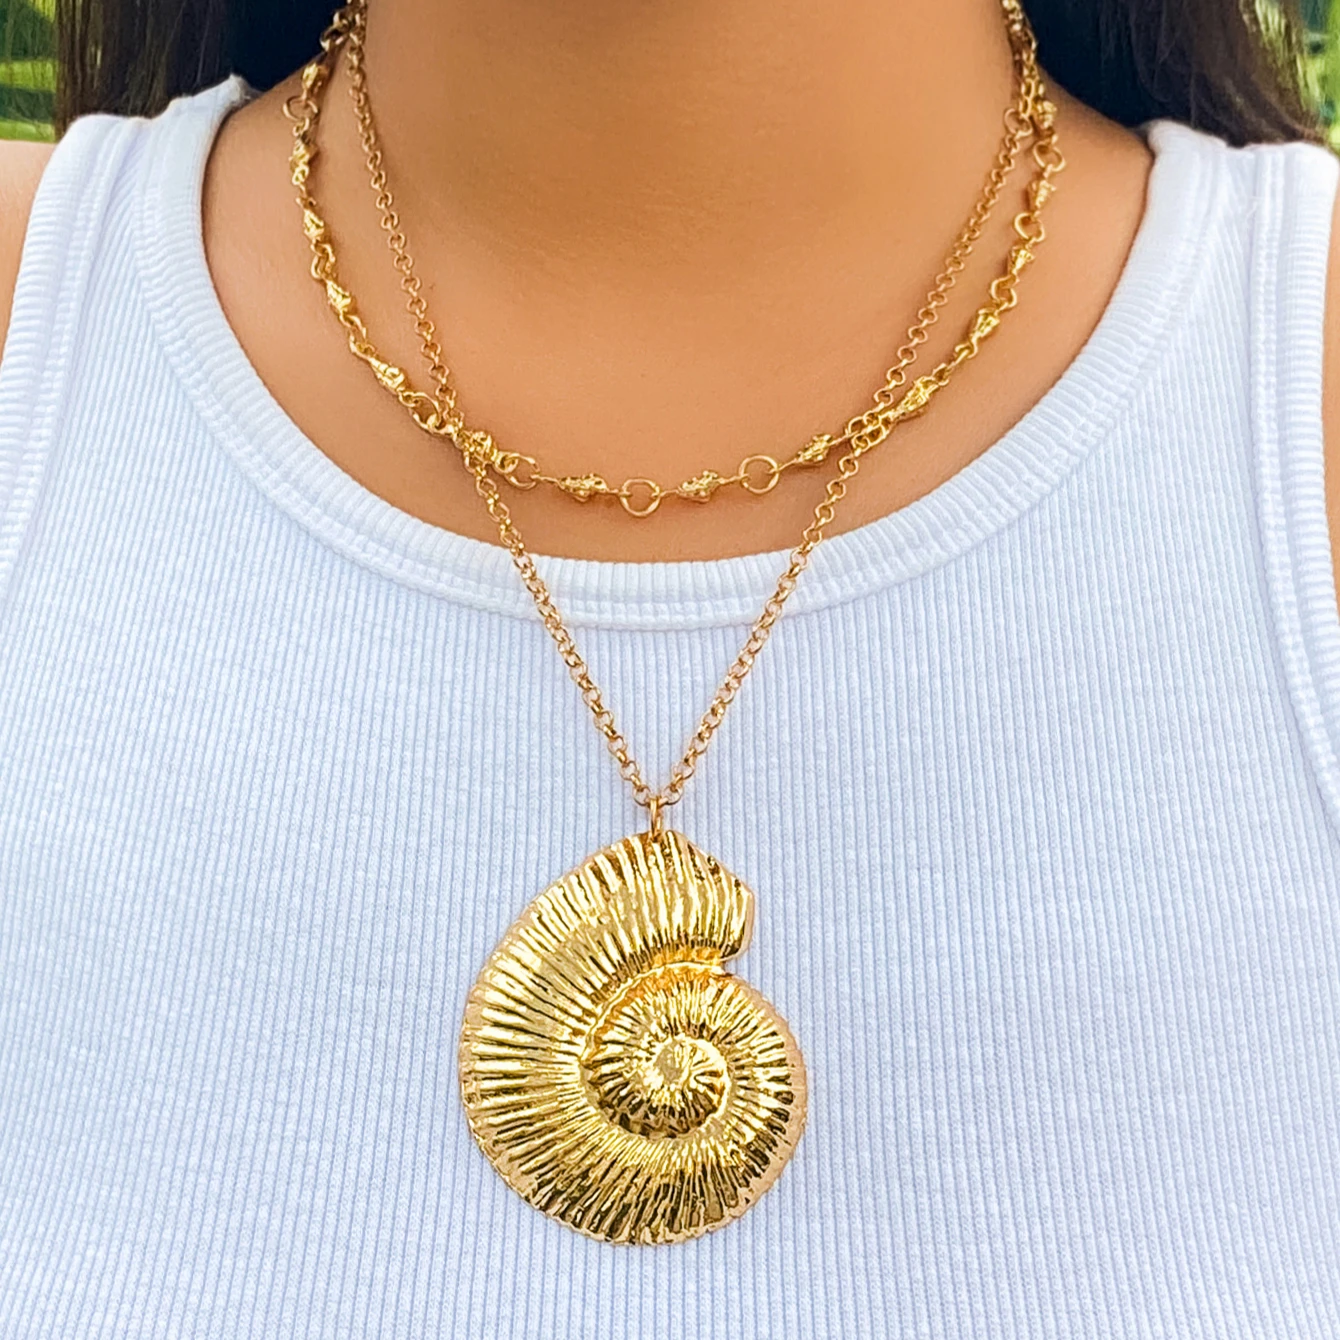 

SHIXIN Exaggerated Gold Big Conch Pendant Choker Necklace Women Vintage Spiral Symbol Metal Chain Vacation Jewelry Steampunk